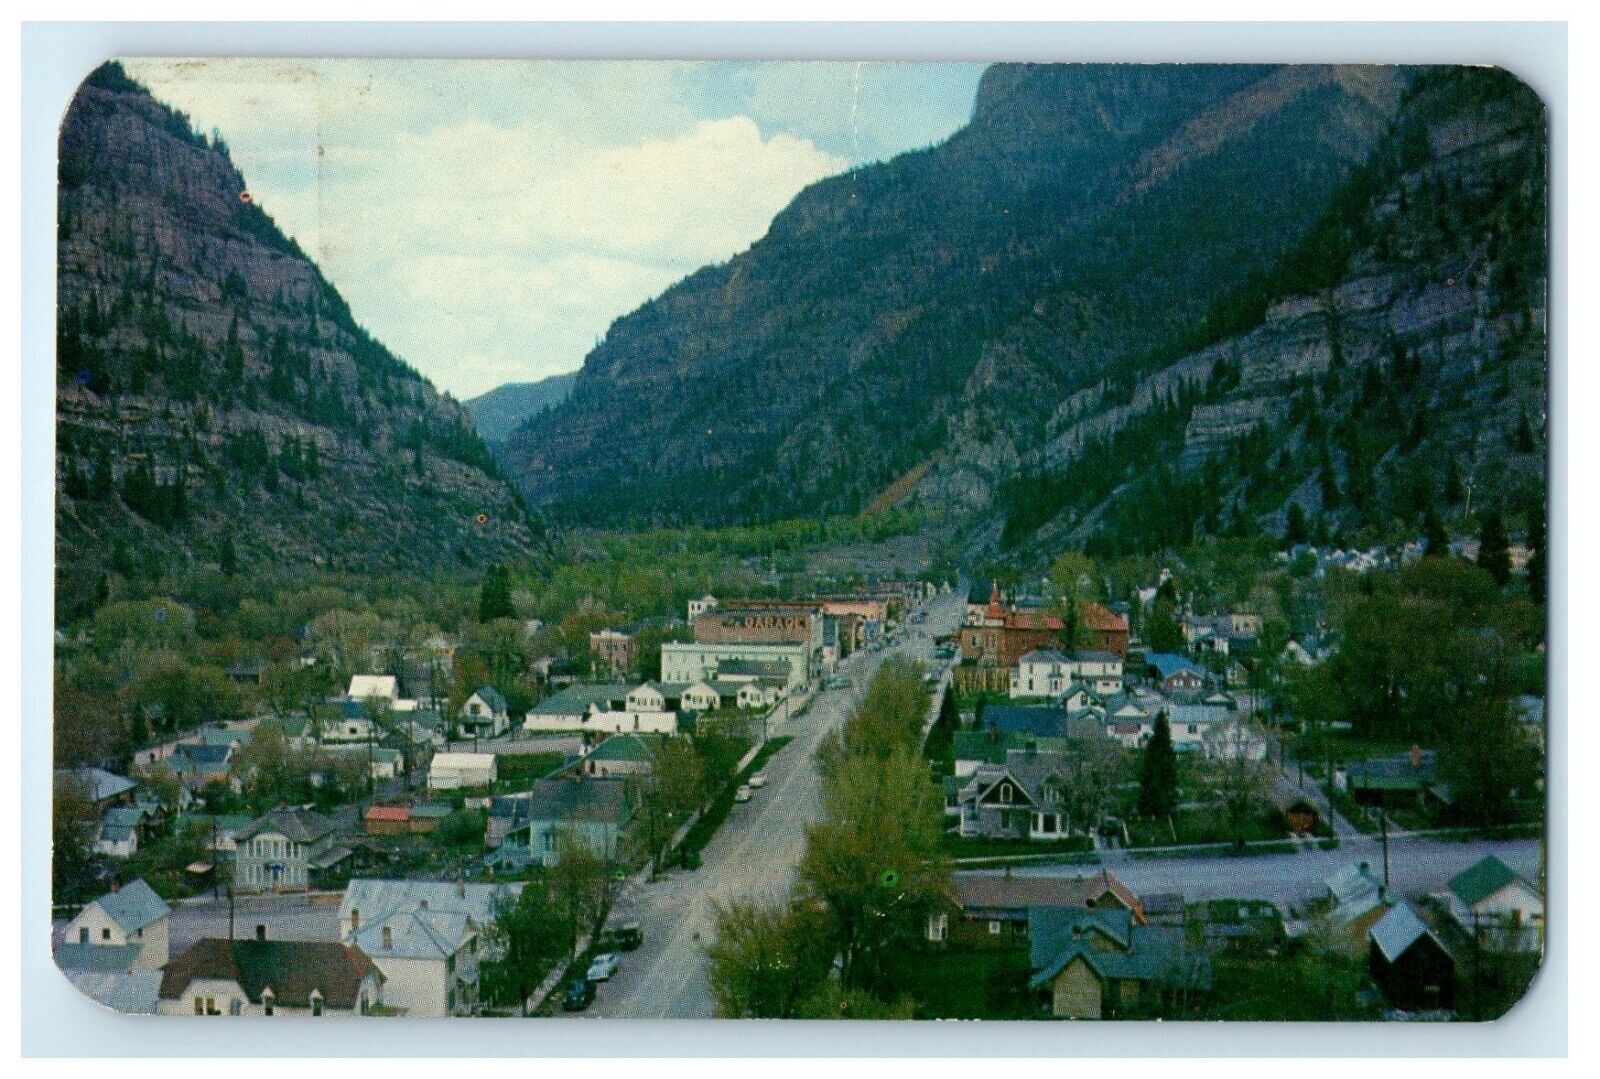 1930 Panorama of Ouray, US 550 Highway, Ouray, Colorado CO Antique Postcard